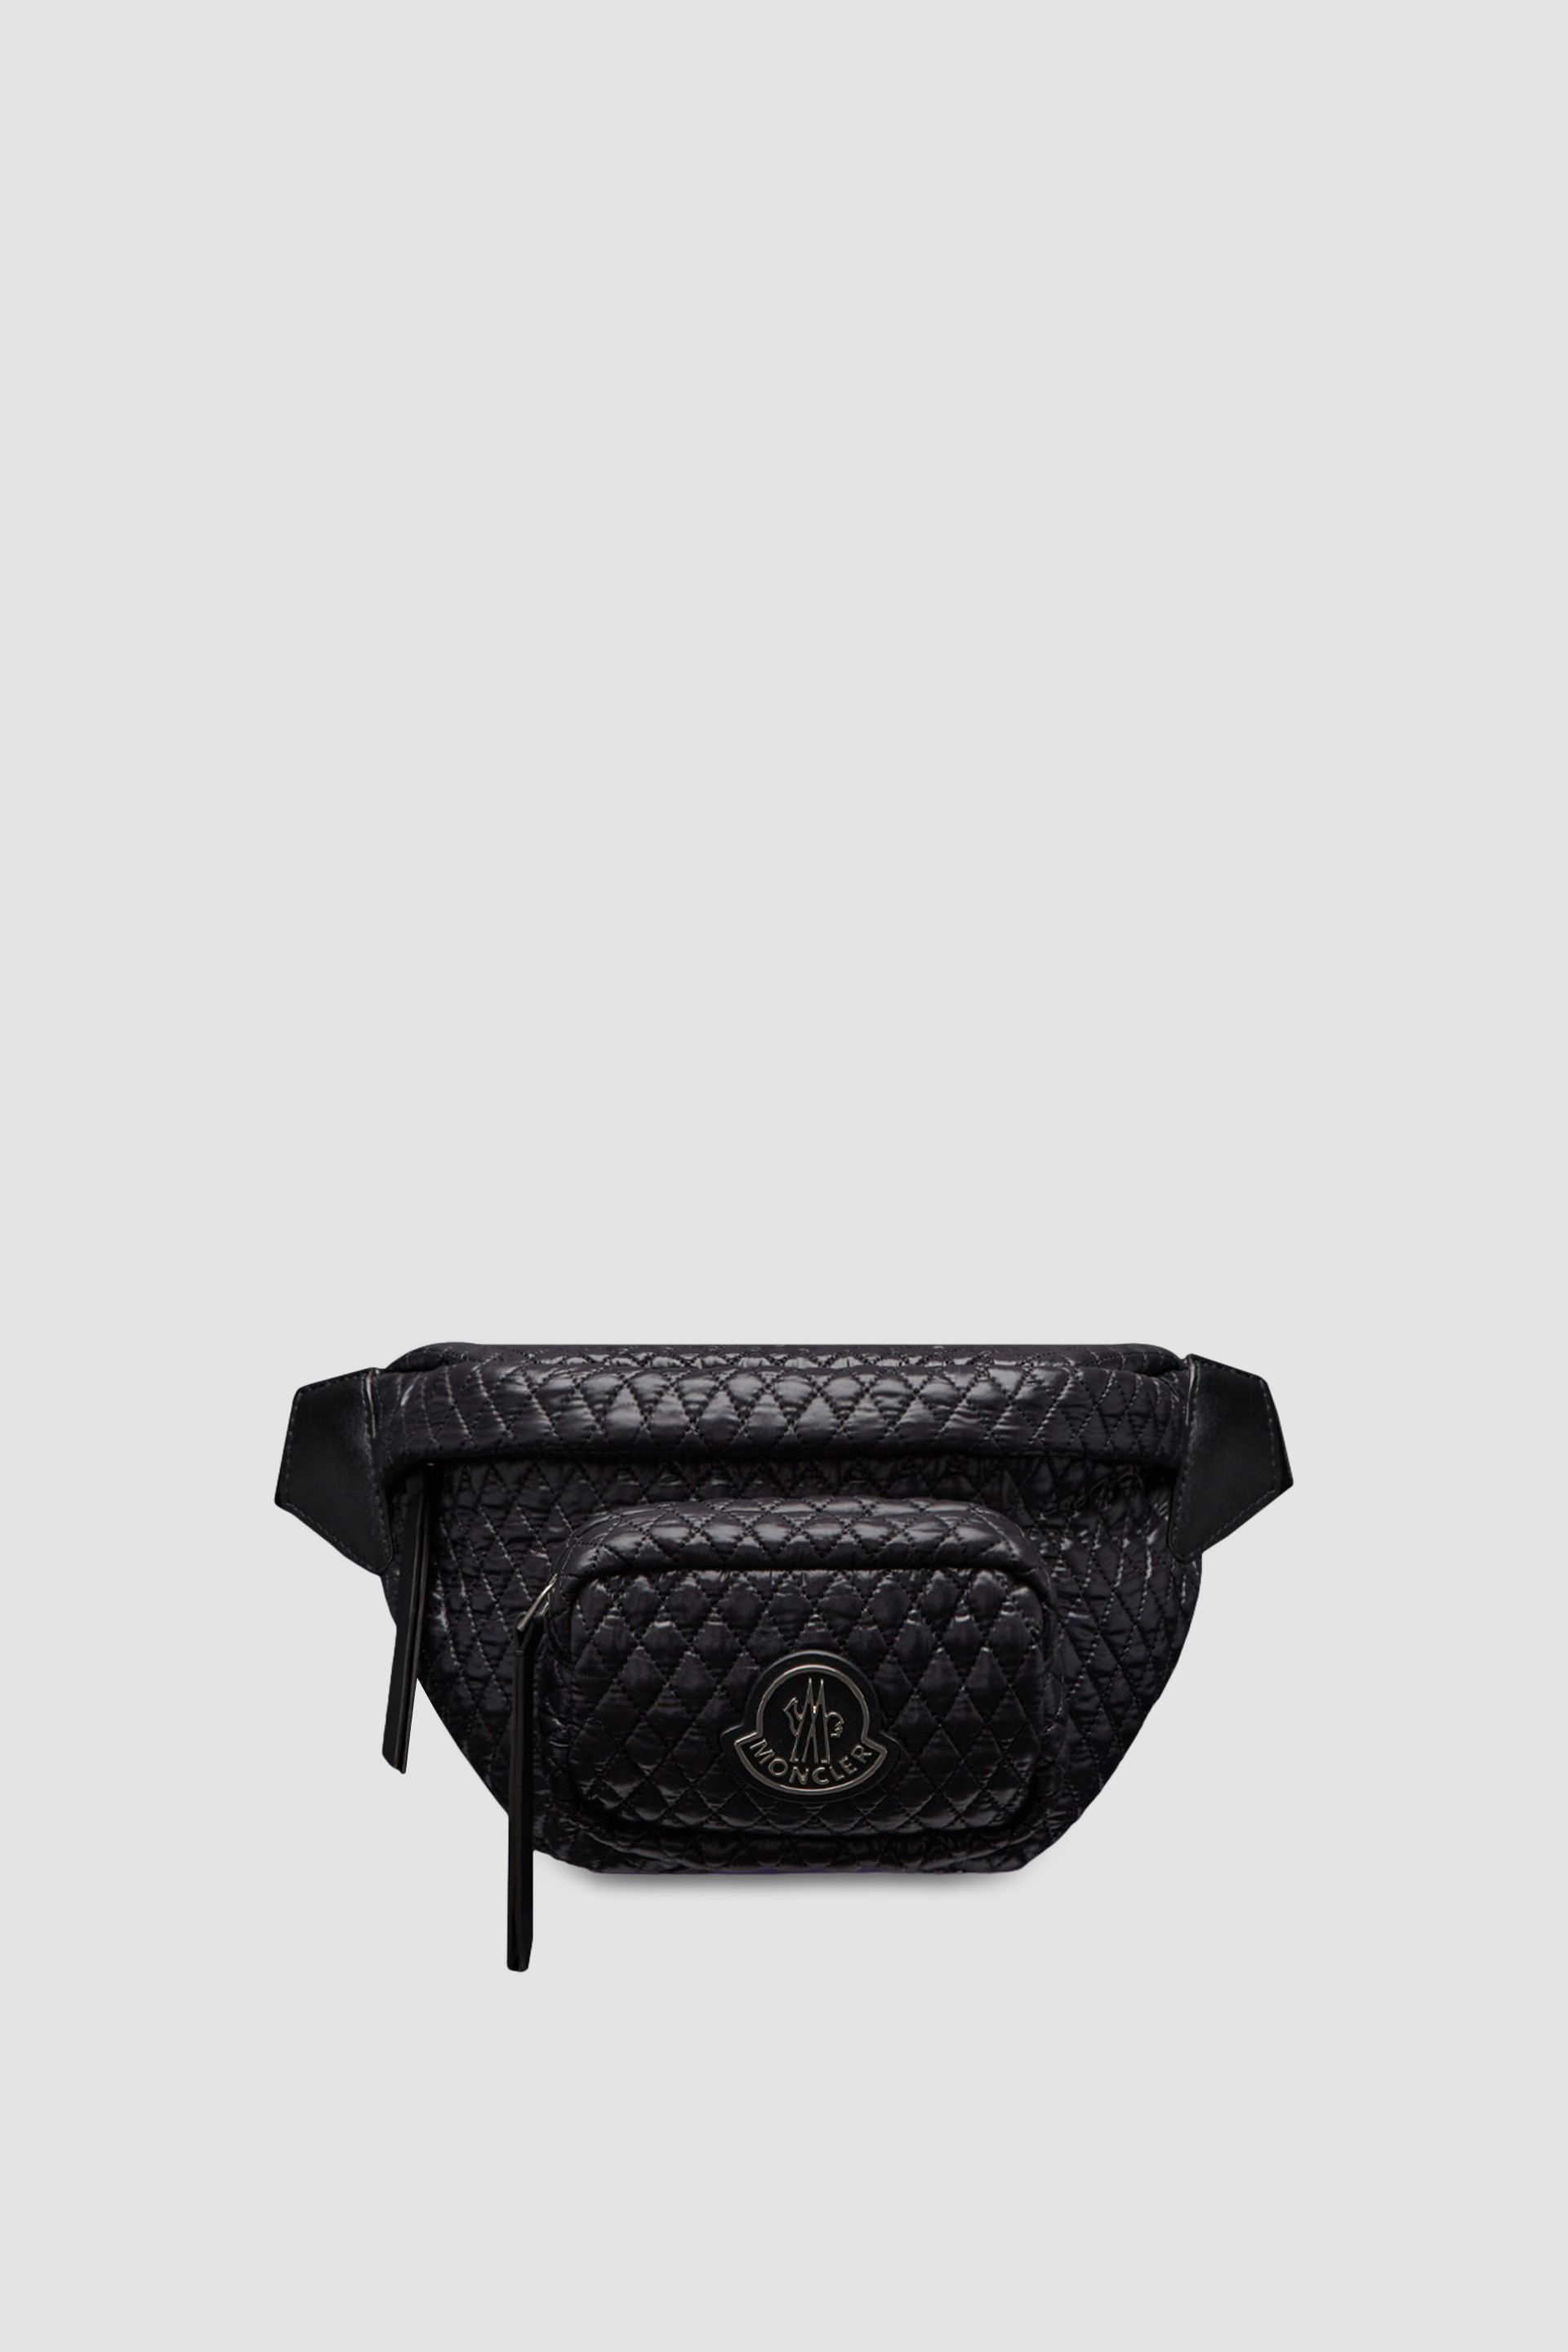 Black Felicie Belt Bag - Bags & Small Accessories for Women